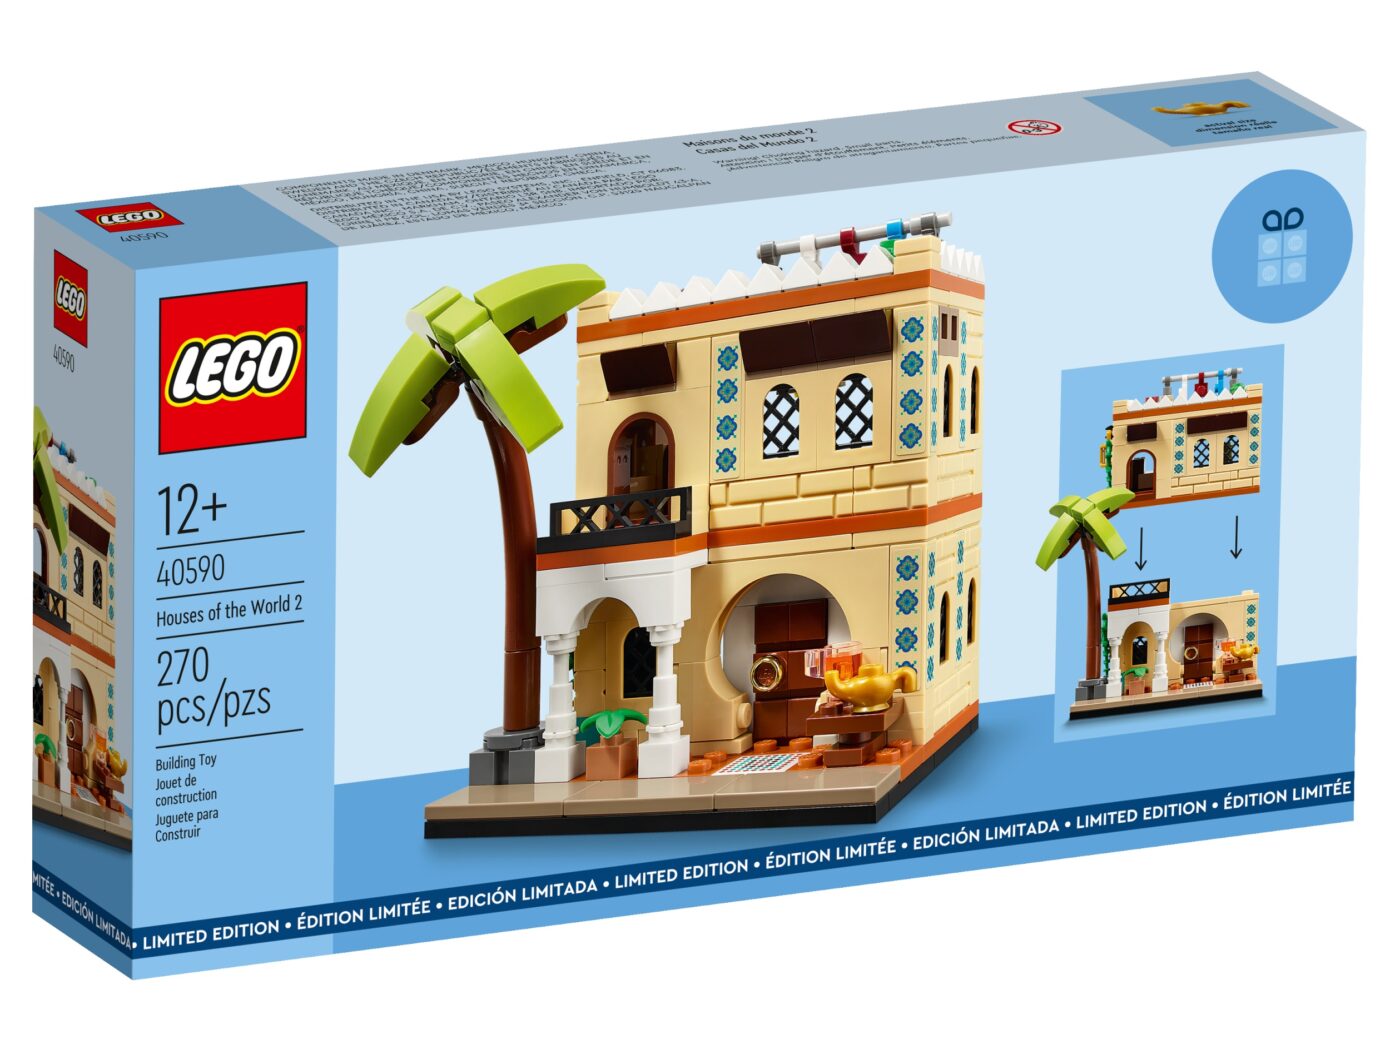 Confirmed: LEGO Houses of the World 3 gift with purchase (GWP) is available from 11 August7